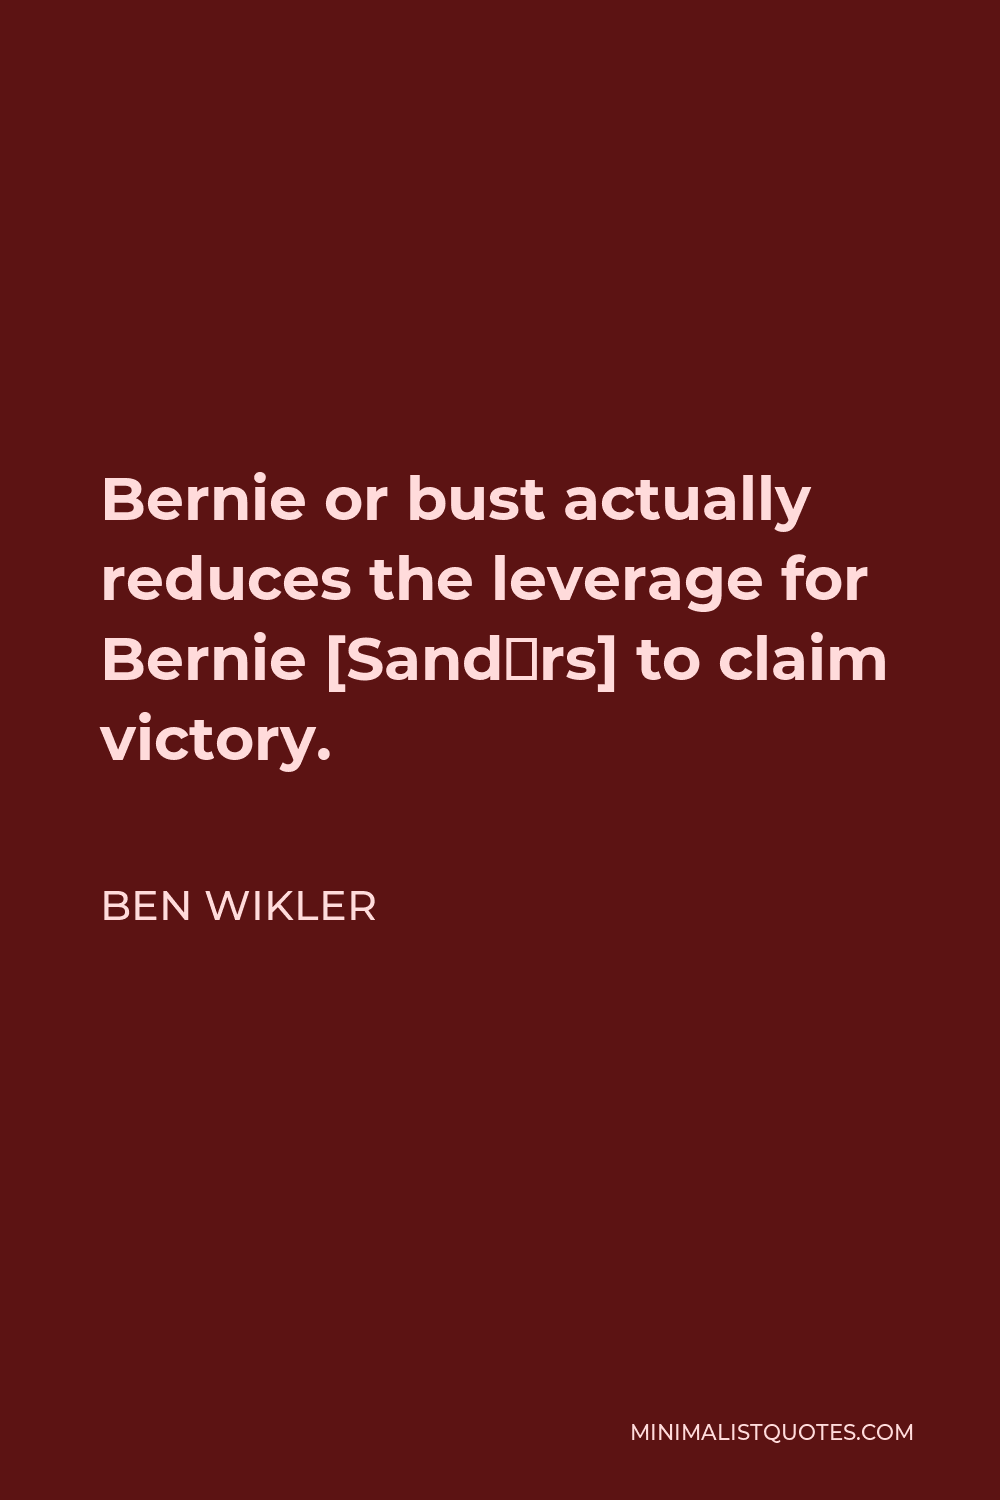 Ben Wikler Quote - Bernie or bust actually reduces the leverage for Bernie [Sandеrs] to claim victory.